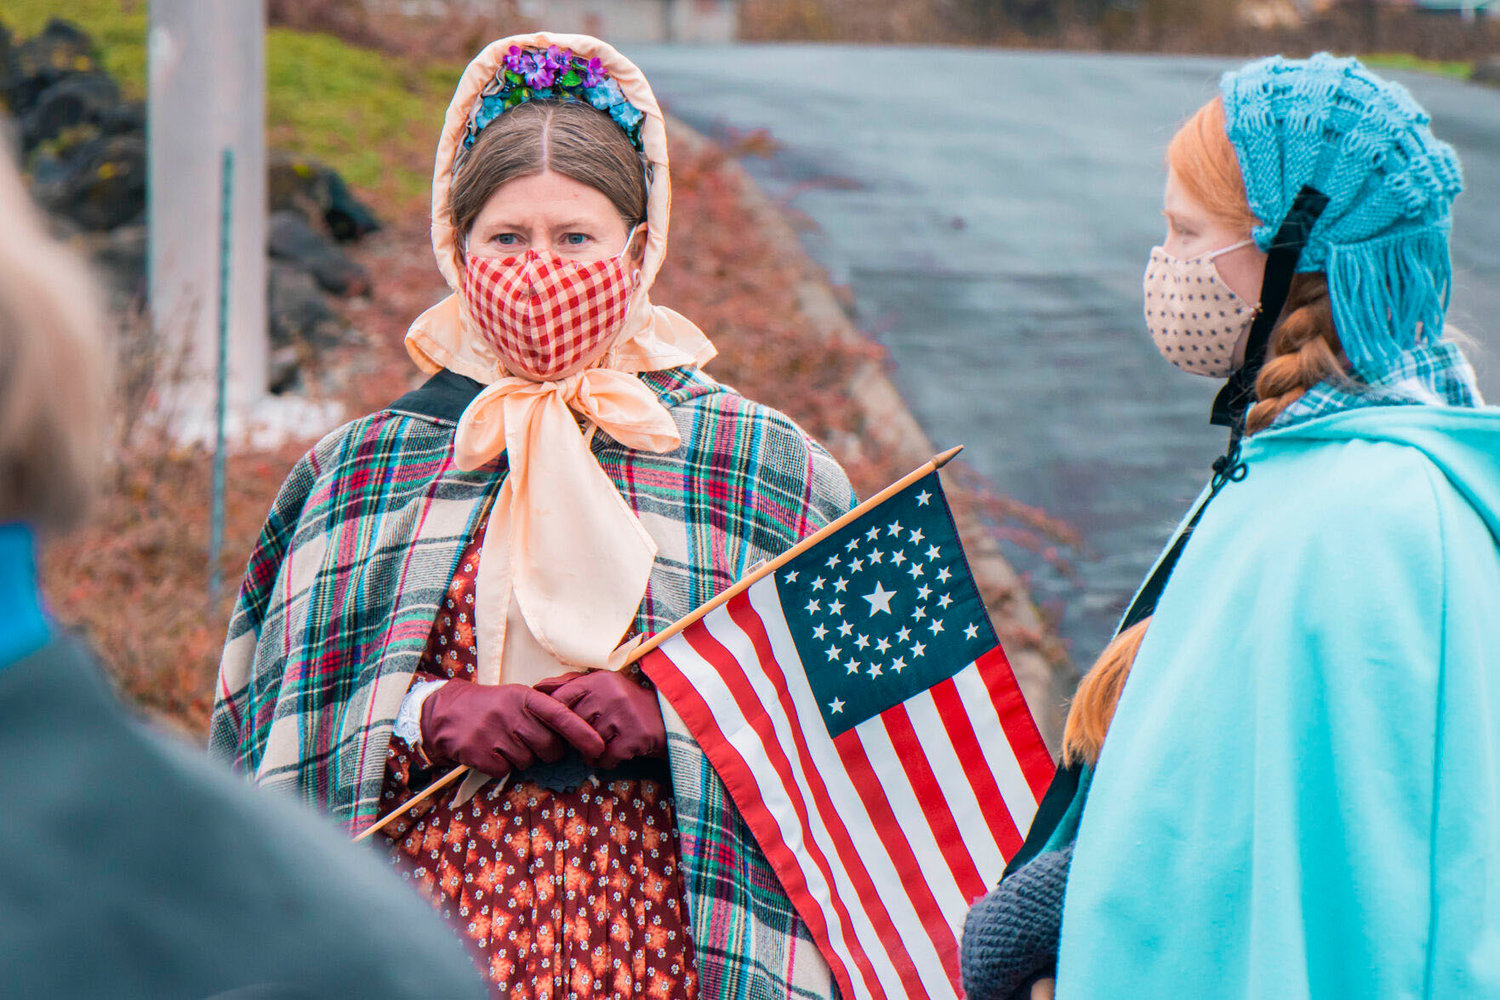 Re-enactor Nevi Meyers, right, looks on as Jennifer Hase holds onto a 1863 Flag during the Veterans Memorial Museum static parade for Veterans Day in November 2020.